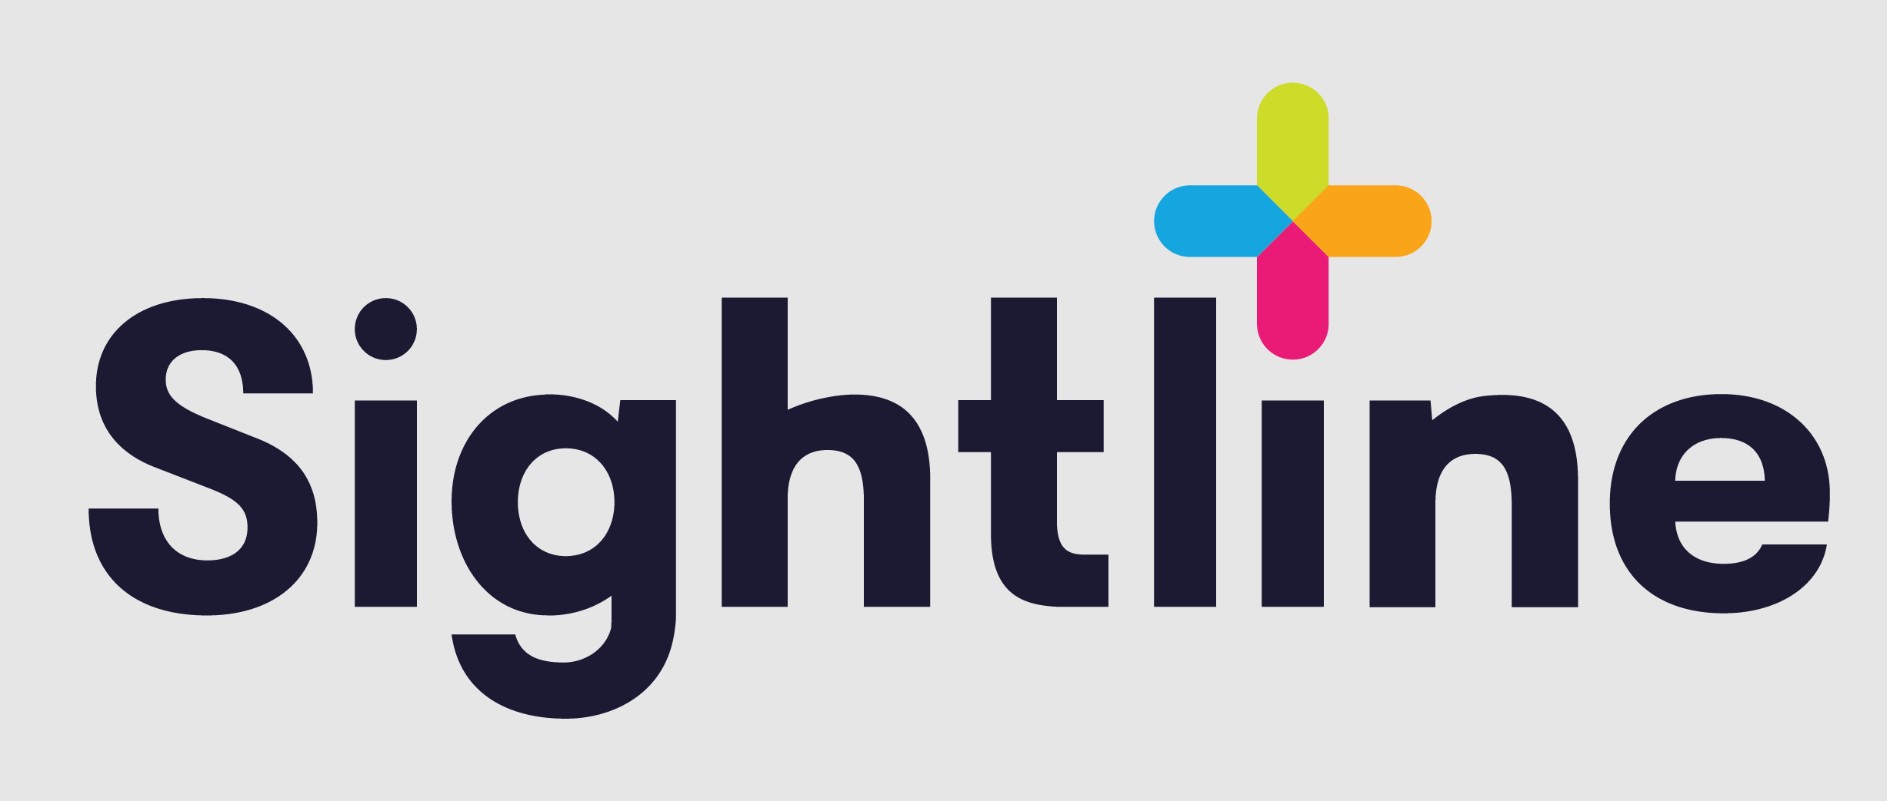 SIGHTLINE WINS PAYMENT SERVICE PROVIDER OF THE YEAR